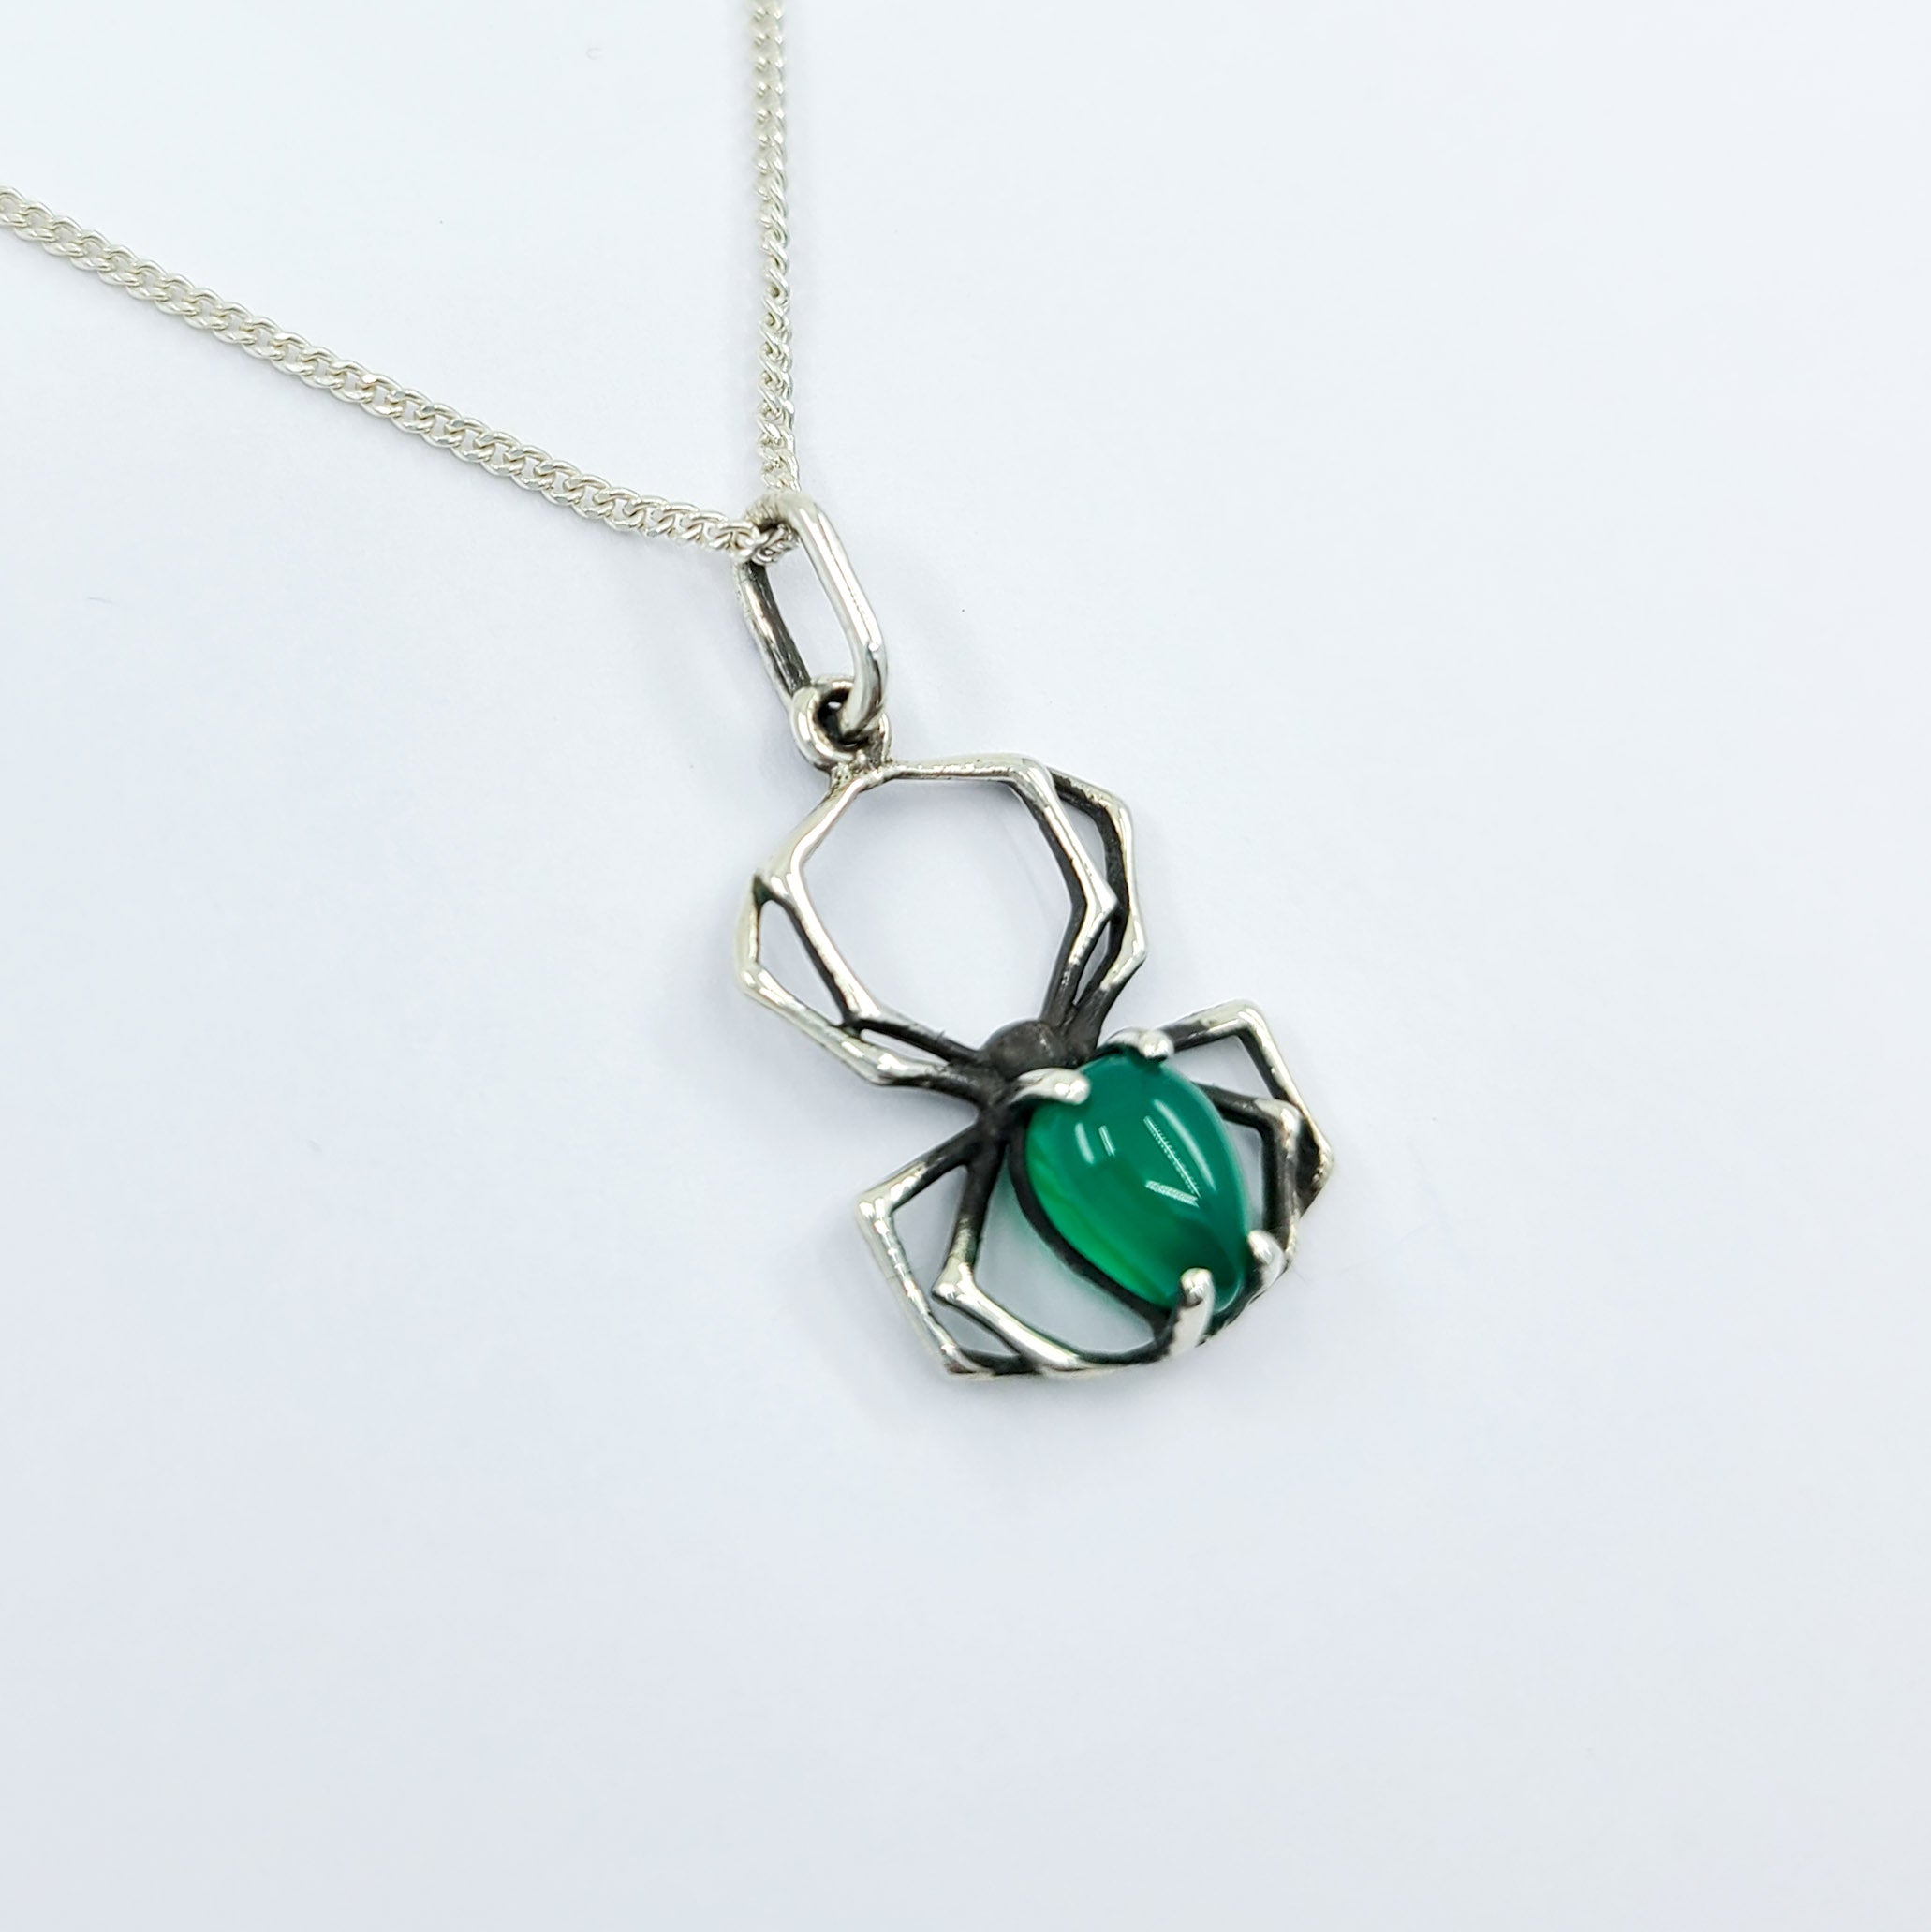 Glowing Green Onyx Spider Pendant